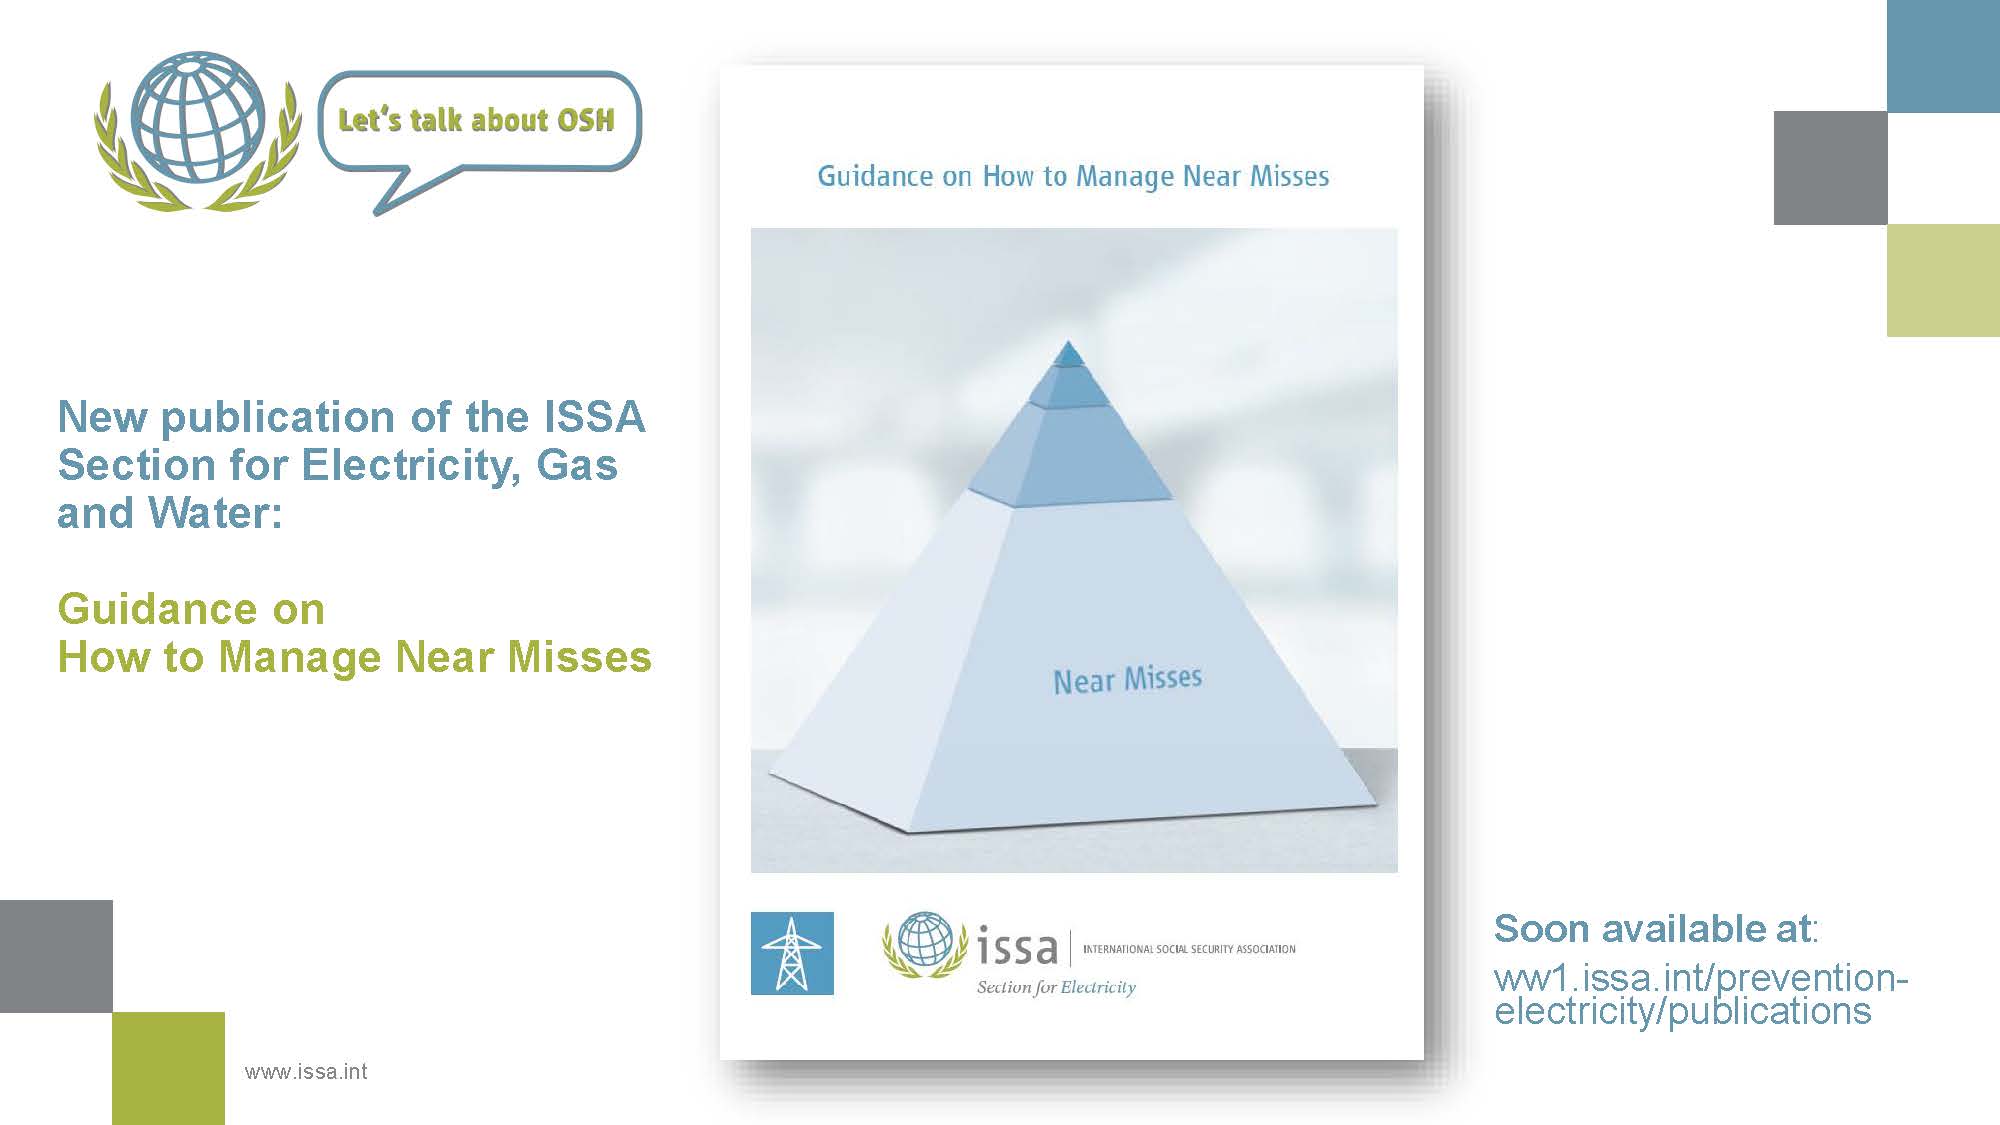 New publication of the ISSA Section for Electricity, Gas and Water: Guidance on How to Manage Near Misses